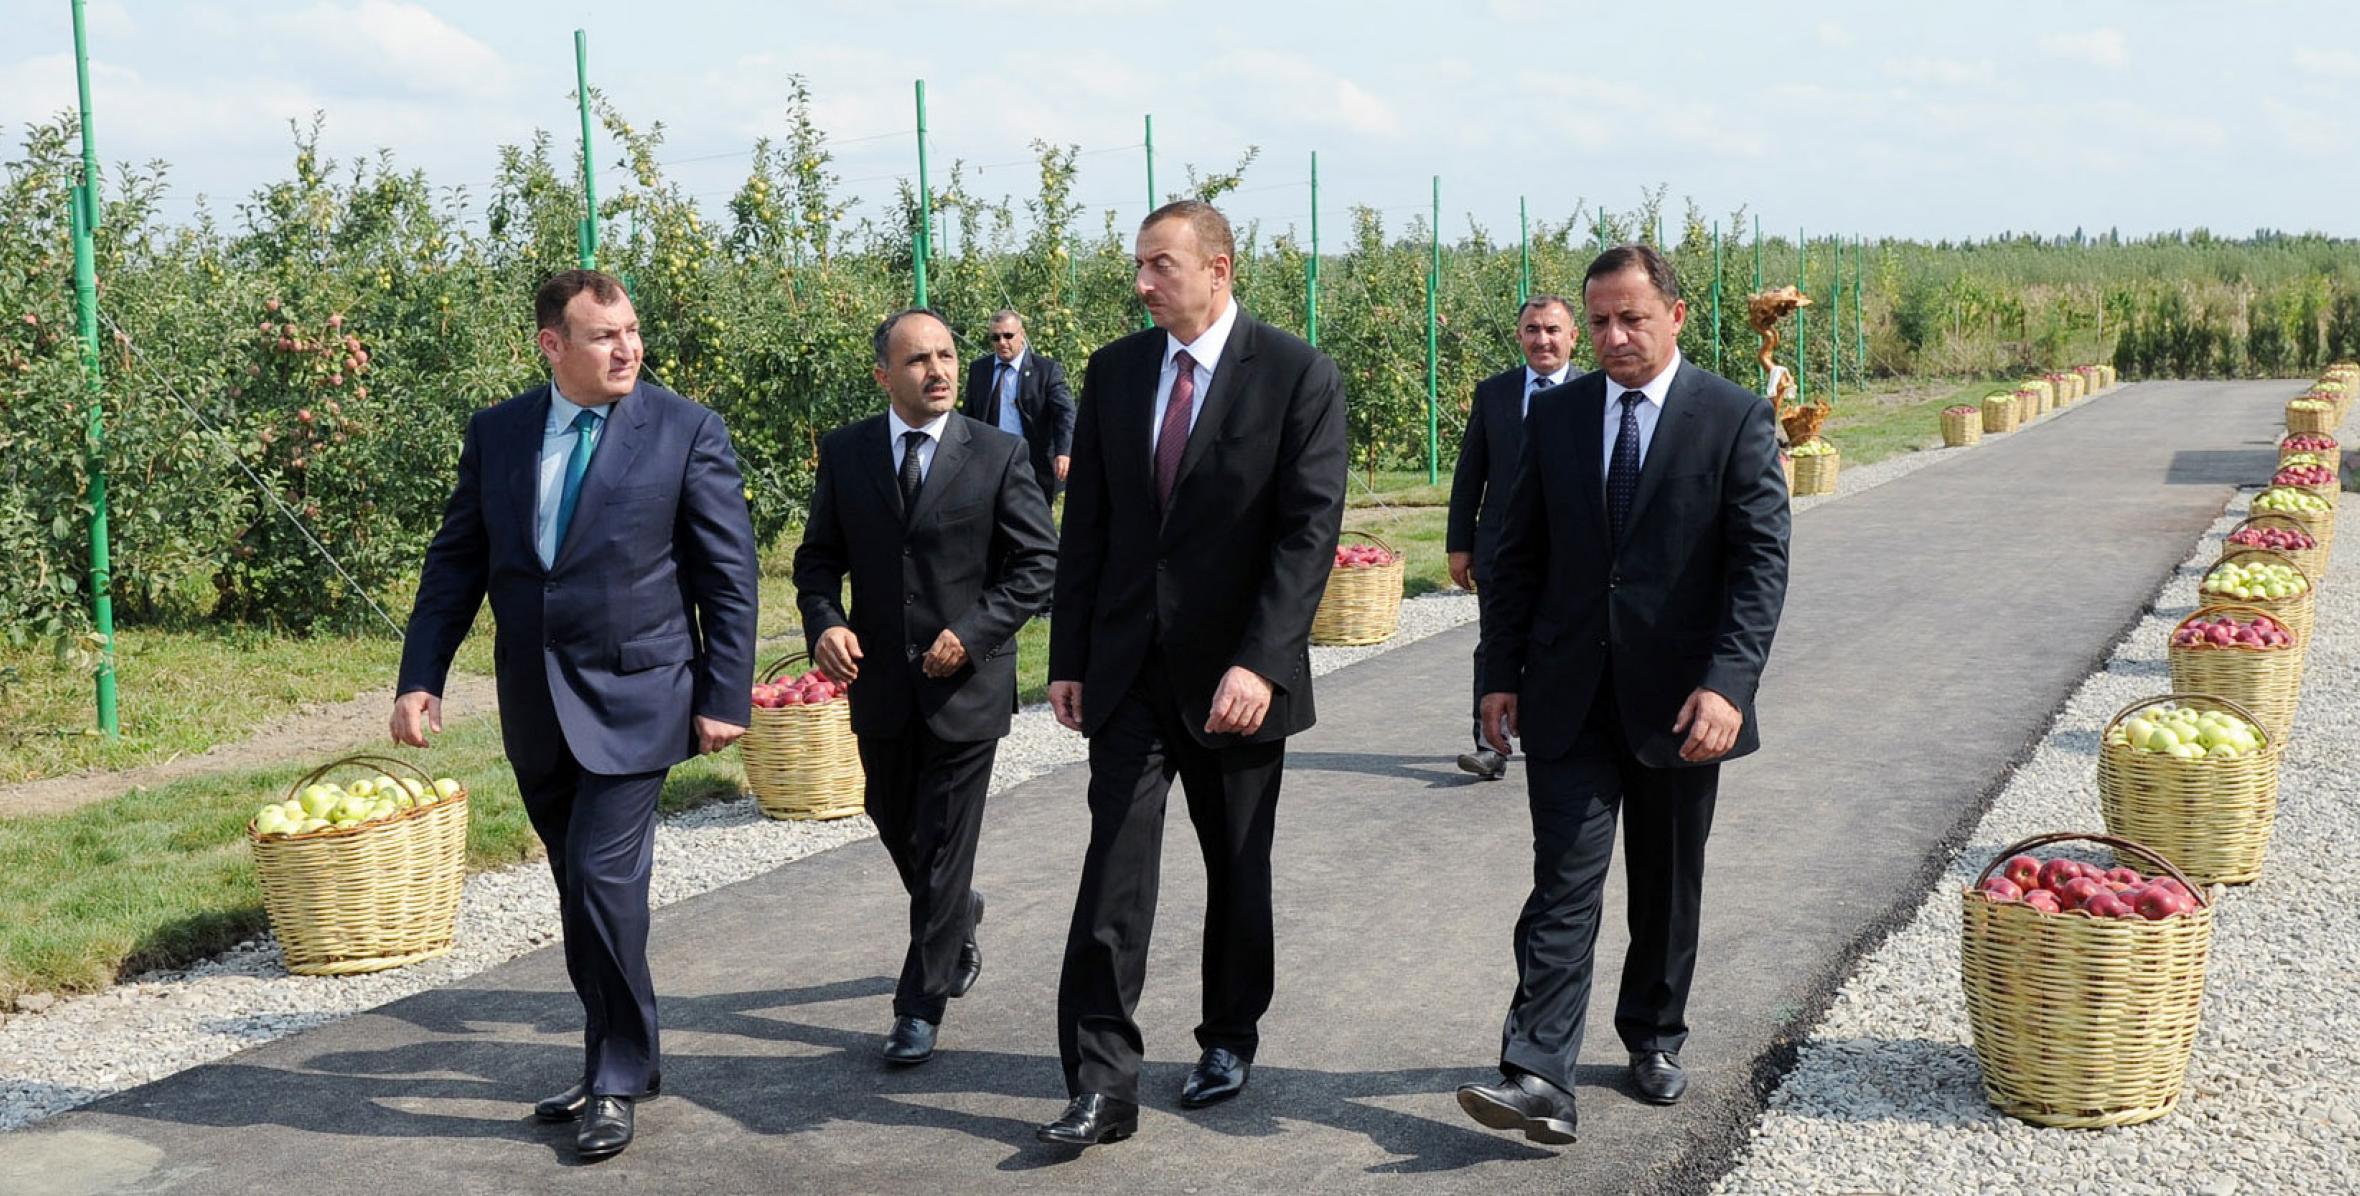 Ilham Aliyev reviewed a cold-storage warehouse for sorting and storing fruit in Guba